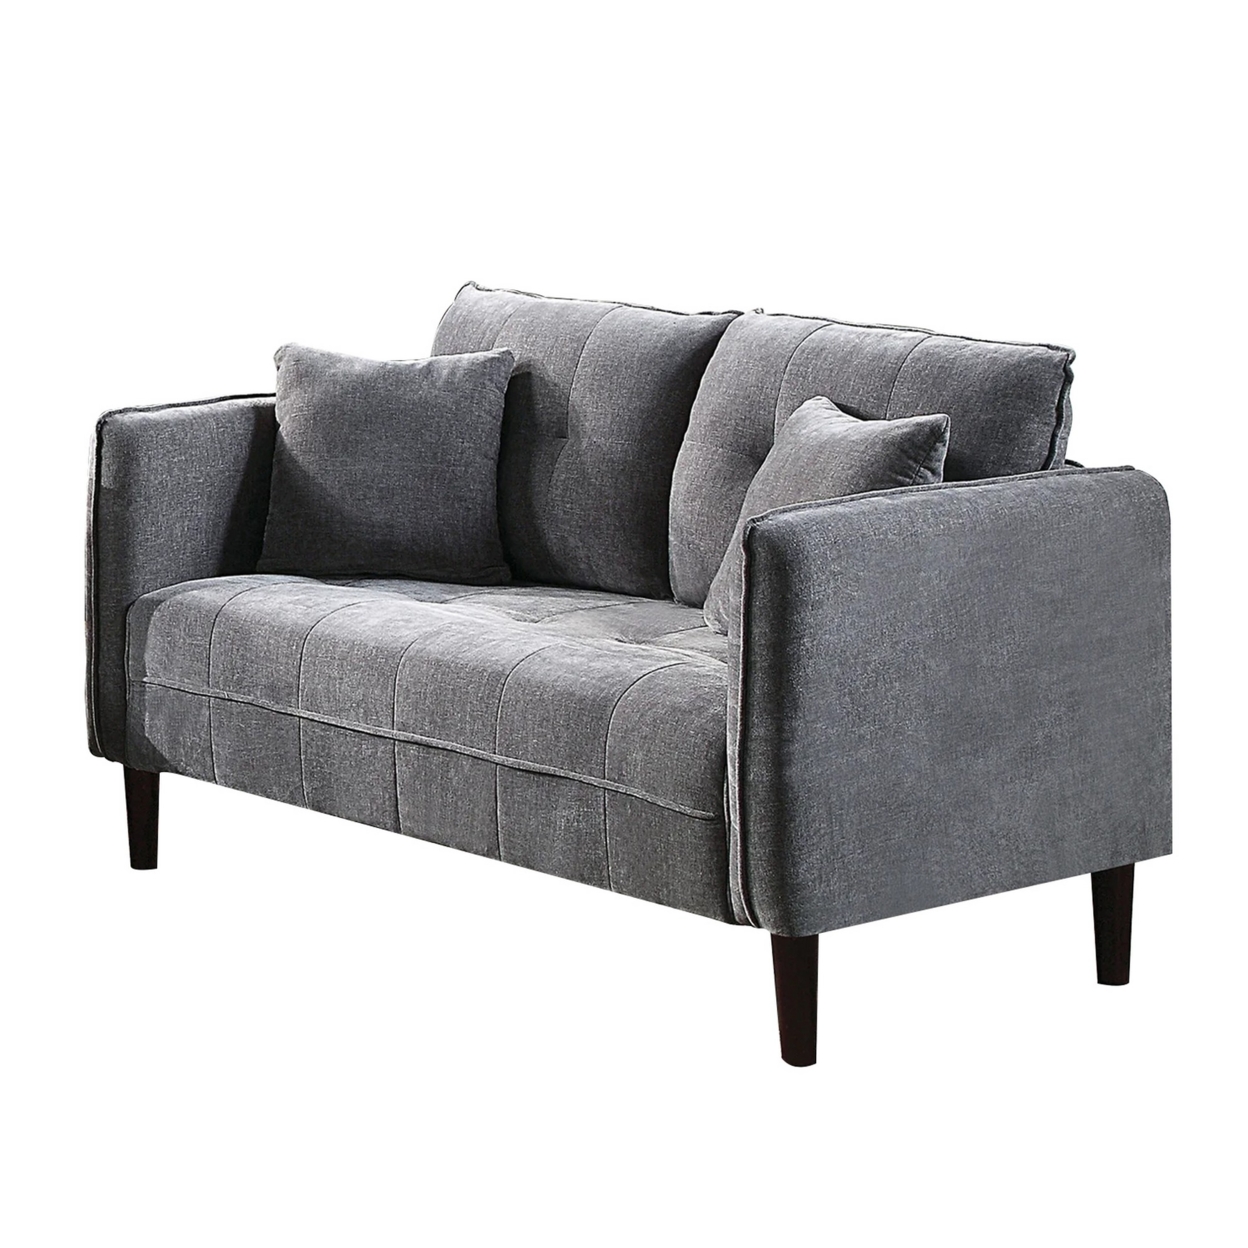 Hak 52 Inch Loveseat, Rounded Curved Arms, Biscuit Tufting, Wood Legs, Gray - Saltoro Sherpi